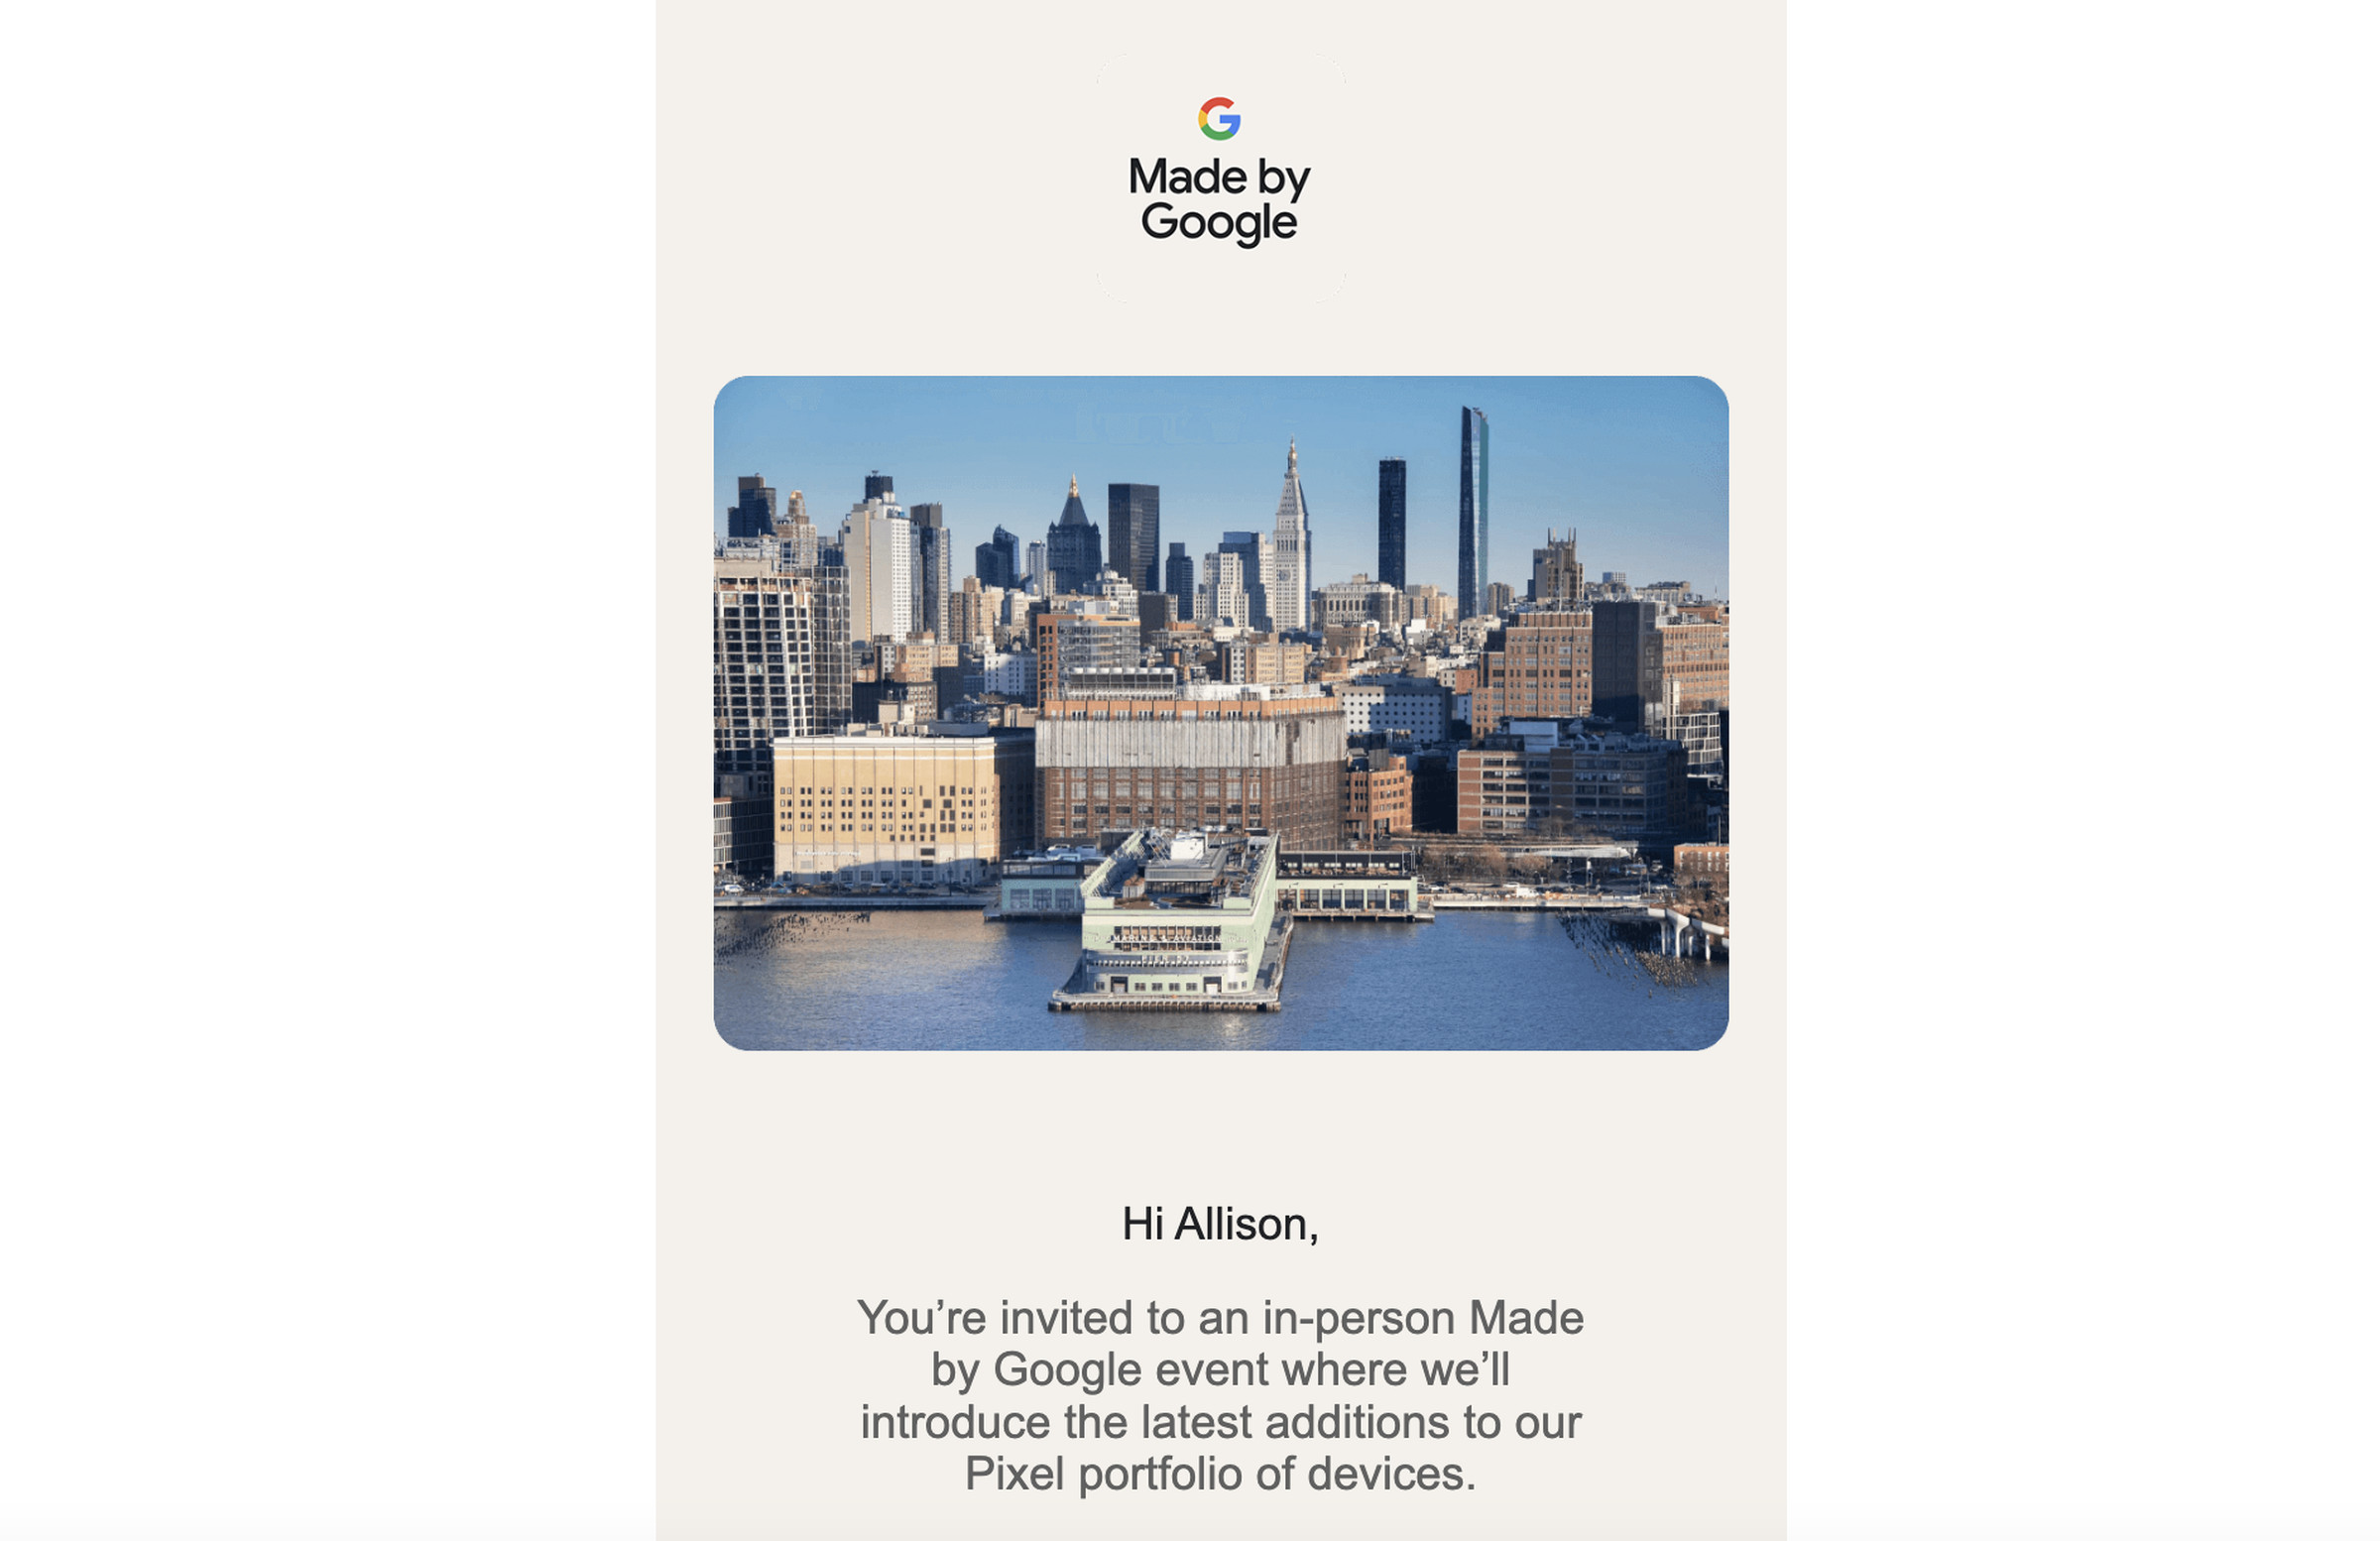 A photo of New York City with the text, “You’re invited to an in-person Made by Google event where we’ll introduce the latest additions to our Pixel portfolio of devices.”